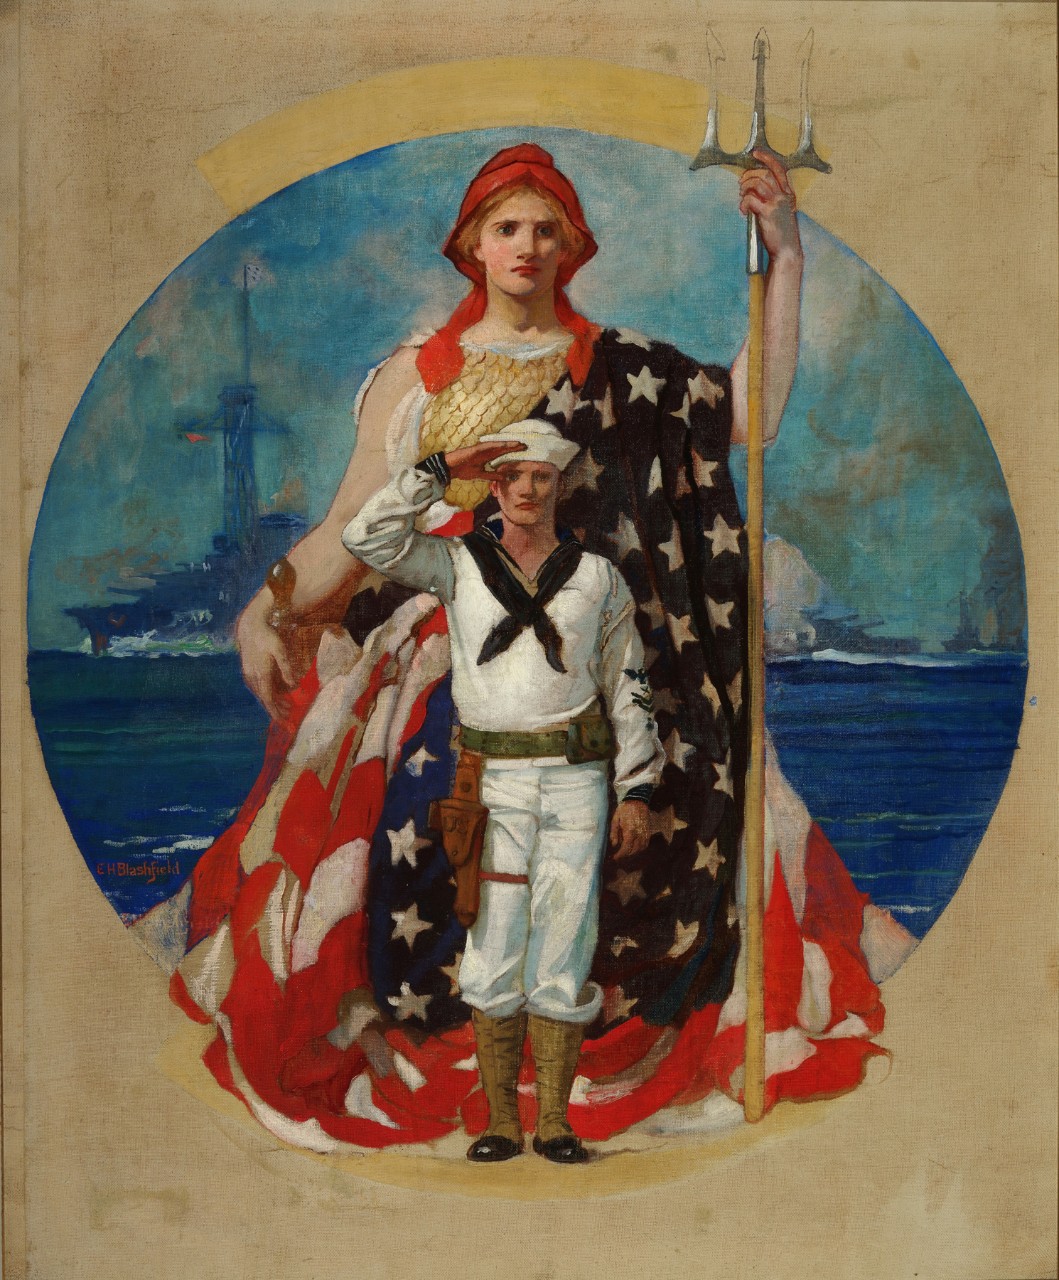 A sailor is saluting. Behind him is a woman dressed in the American flag, she is holding a trident. Behind her is a battleship.